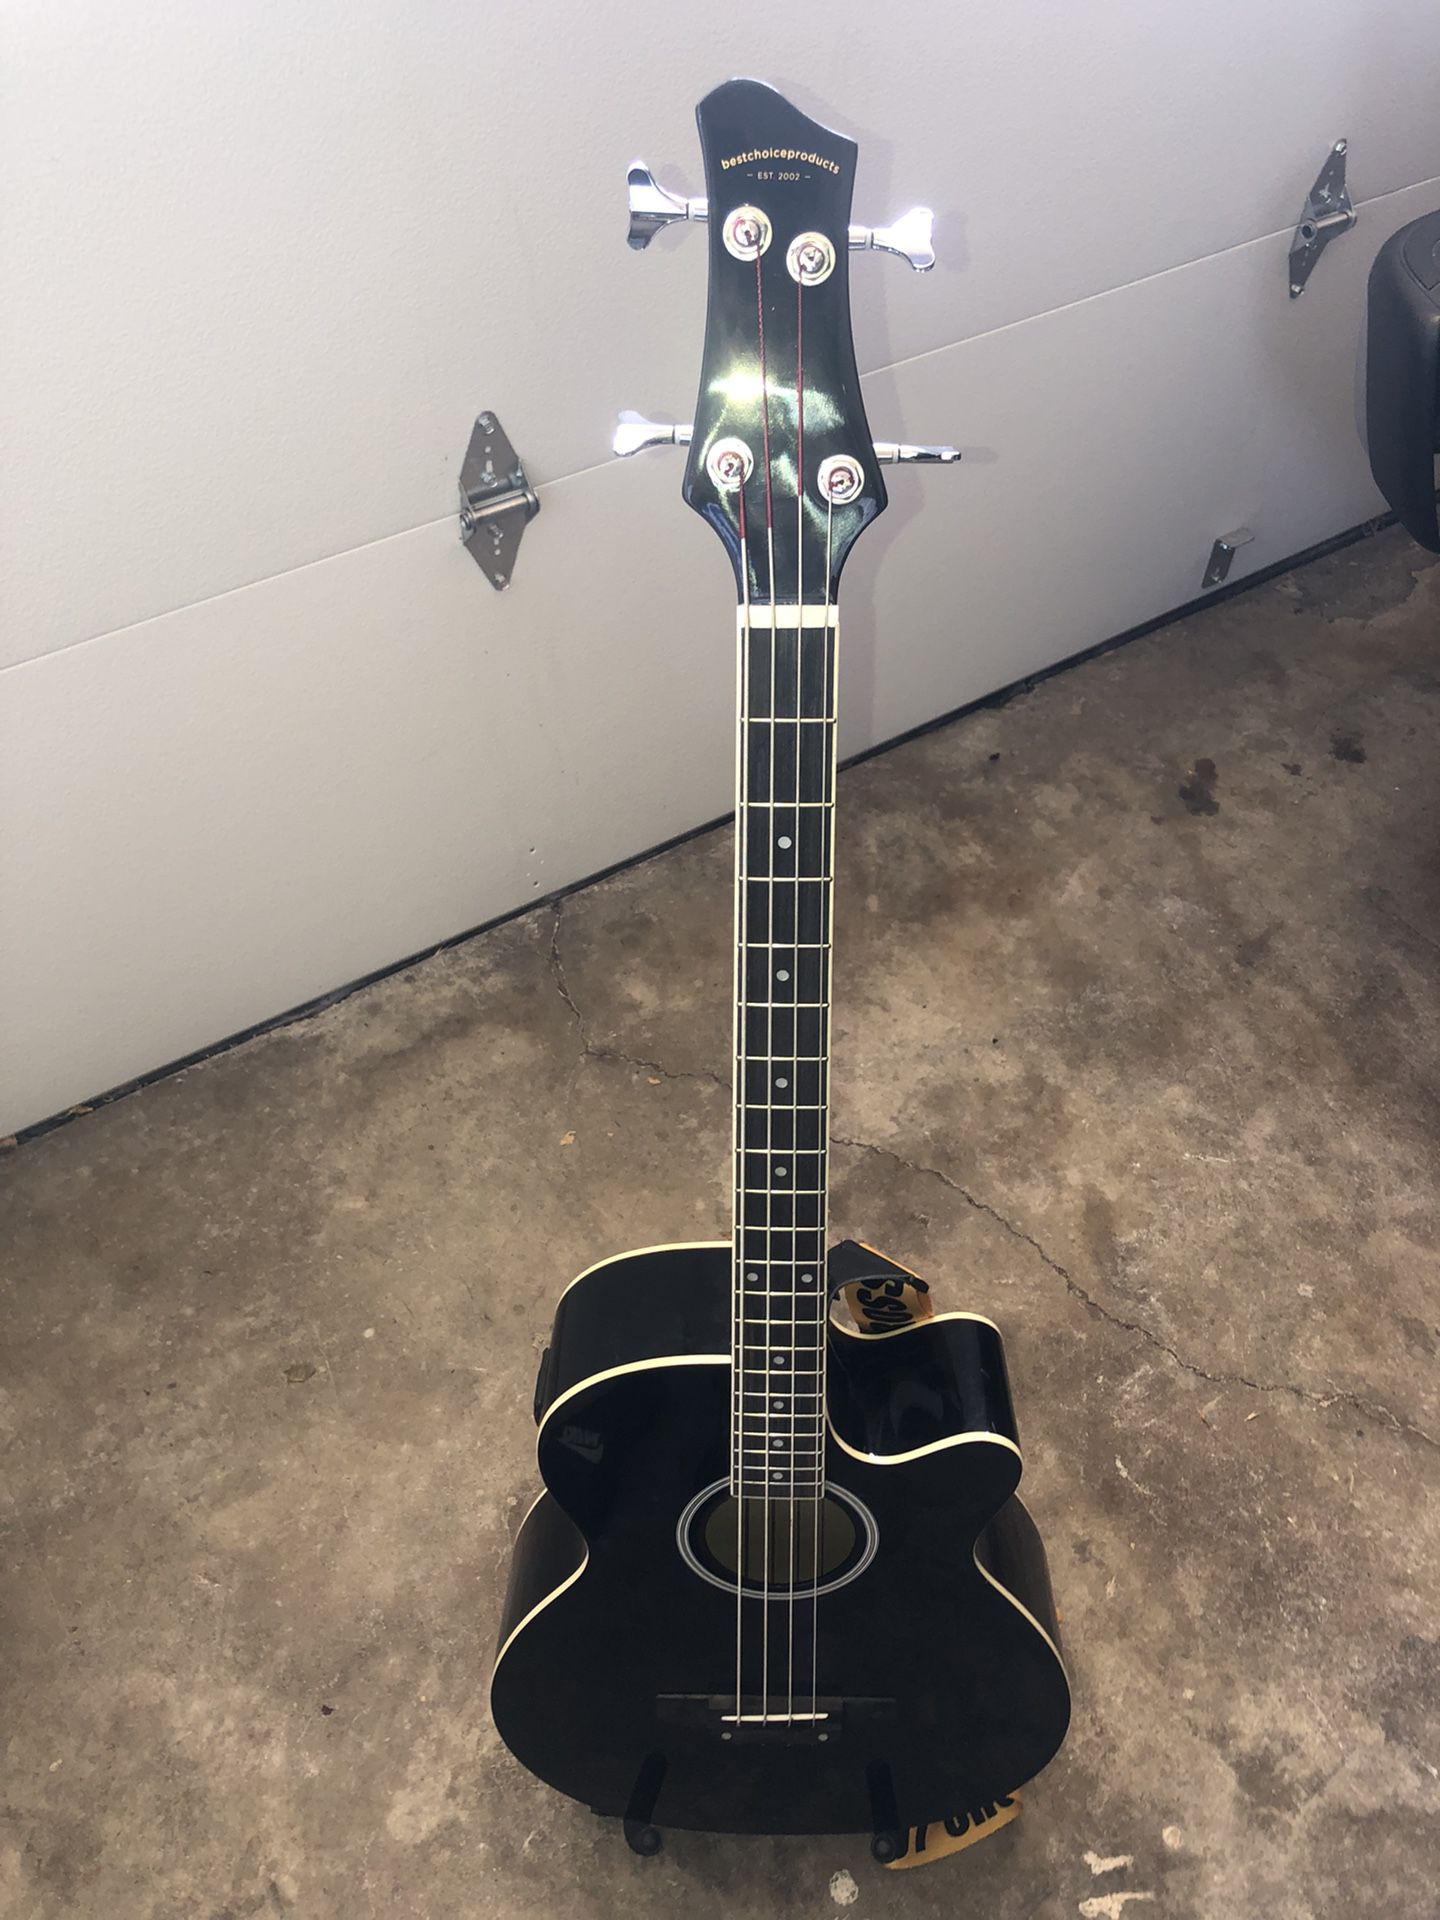 Acoustic Electric Bass Guitar - Full Size, 4 String, Fretted Bass Guitar - Black